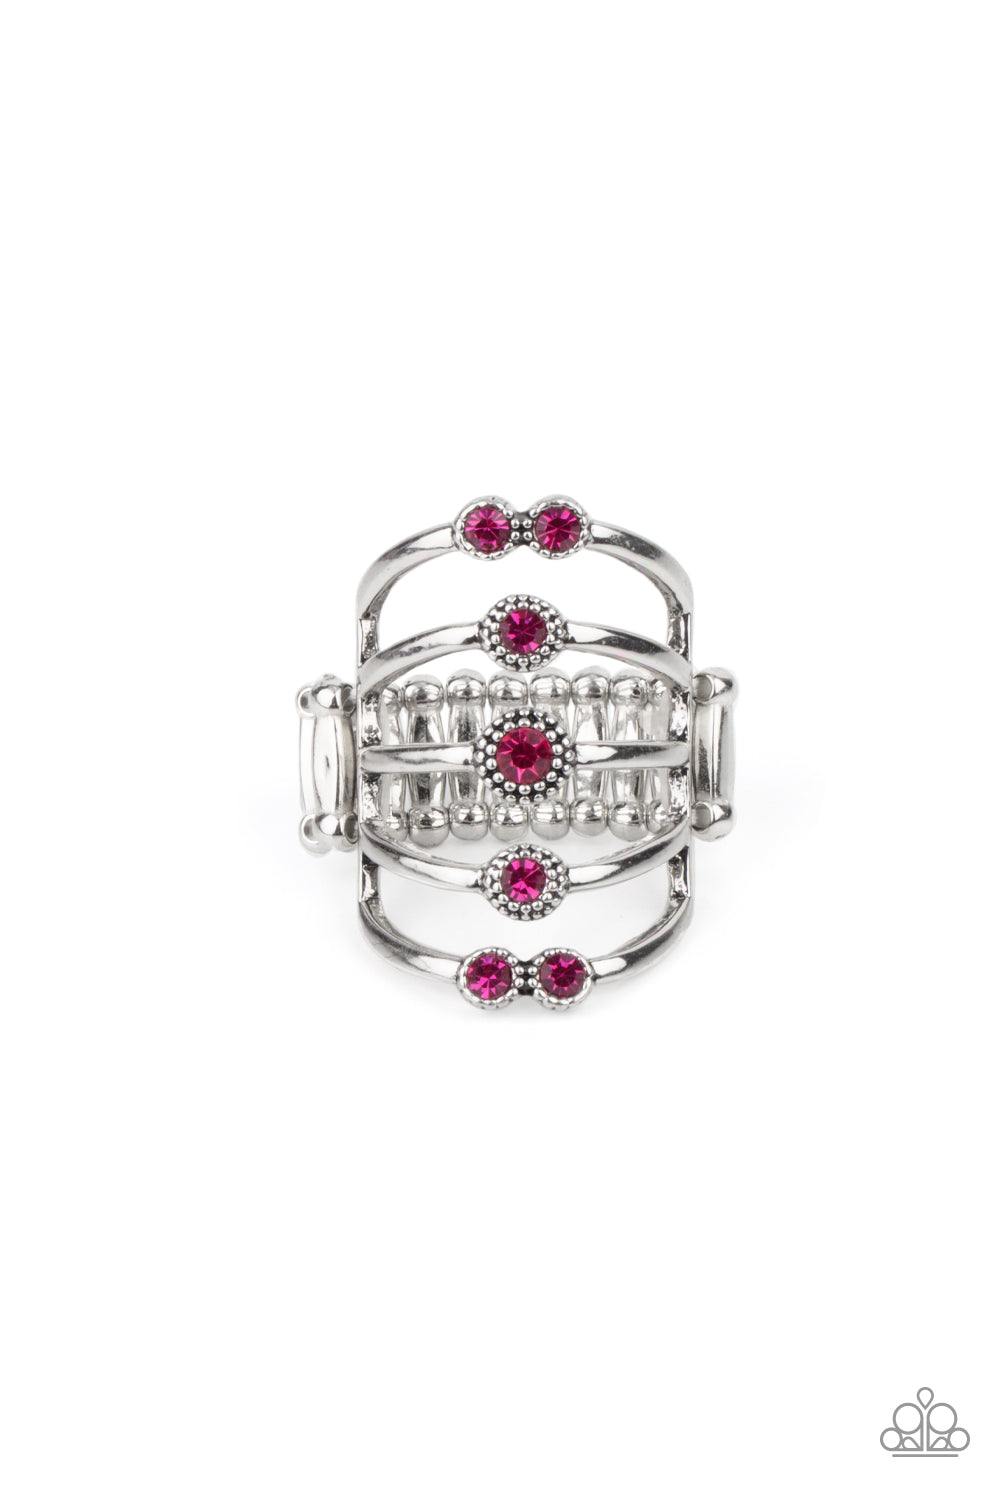 Layer On The Luster - Pink and Silver Ring - Paparazzi Accessories Bejeweled Accessories By Kristie - Trendy fashion jewelry for everyone -